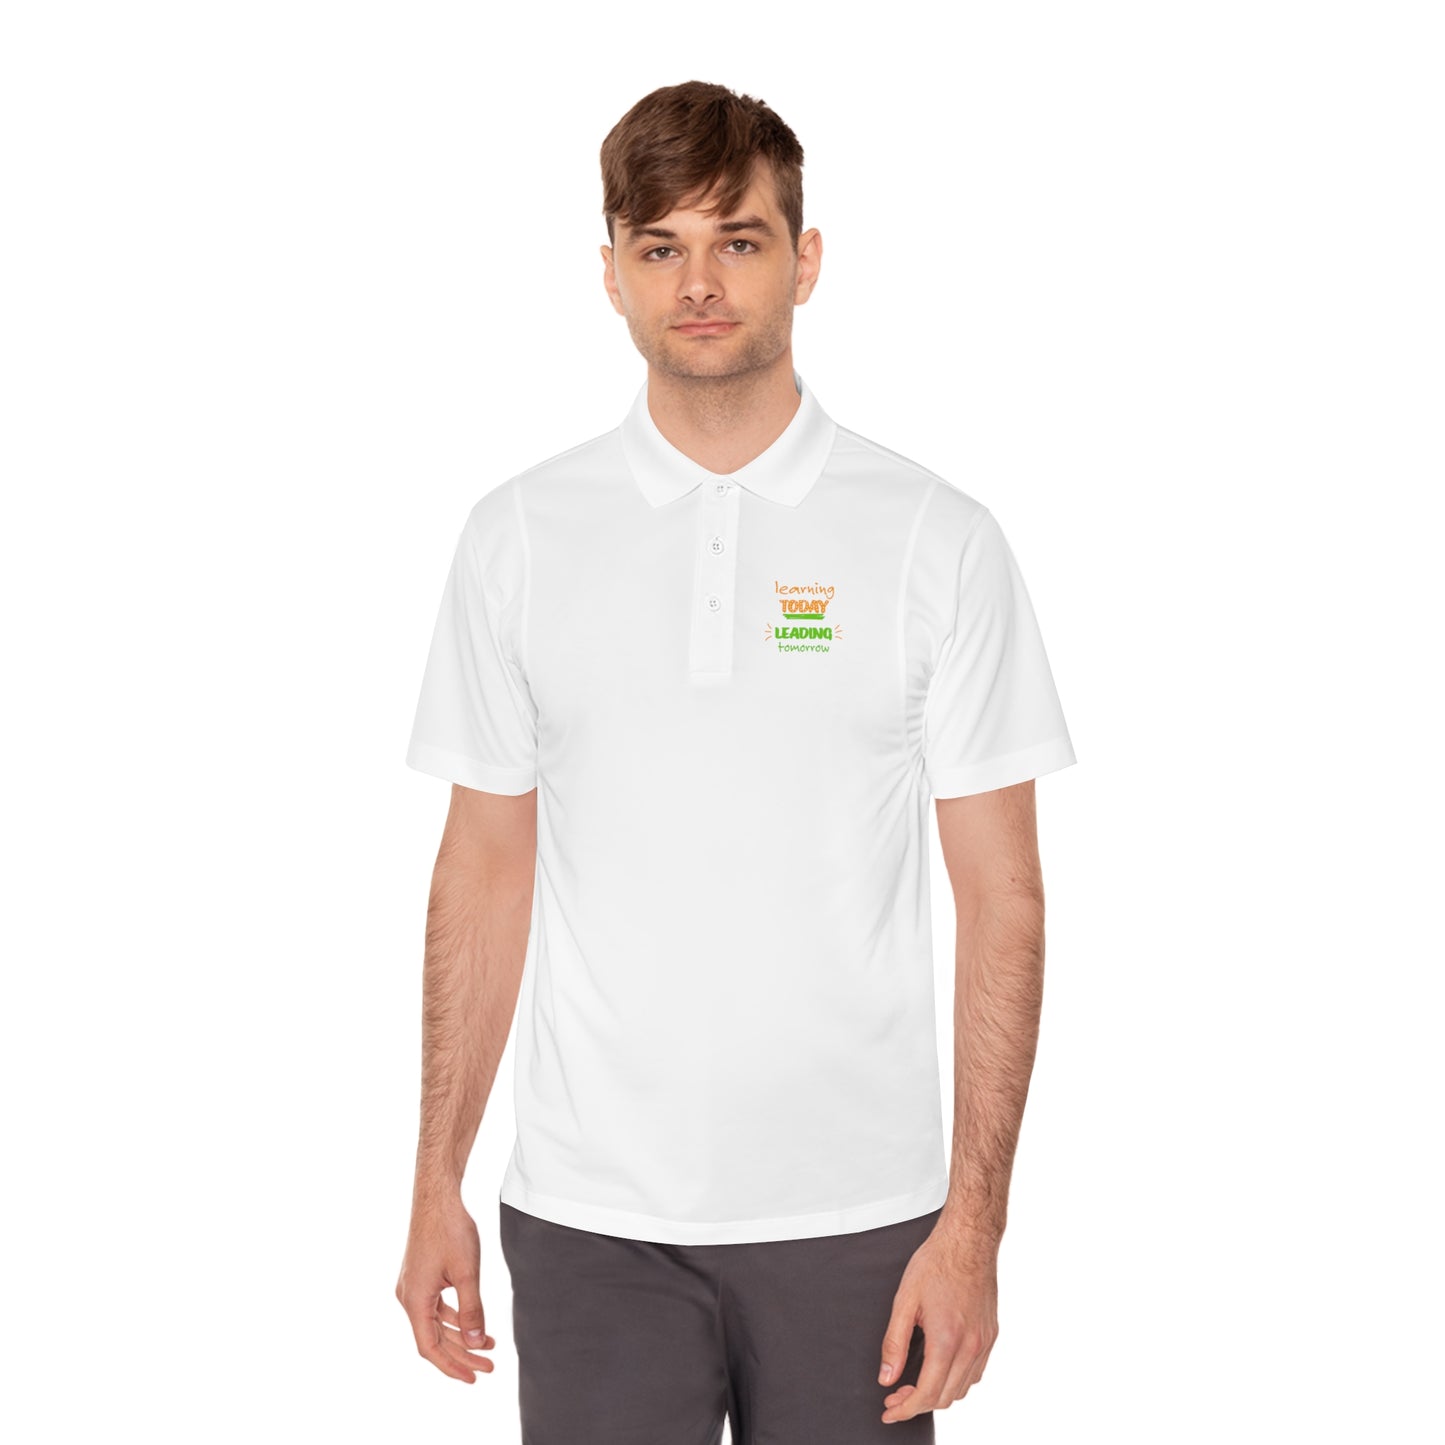 Learning Today Leading Tomorrow Polo Shirt